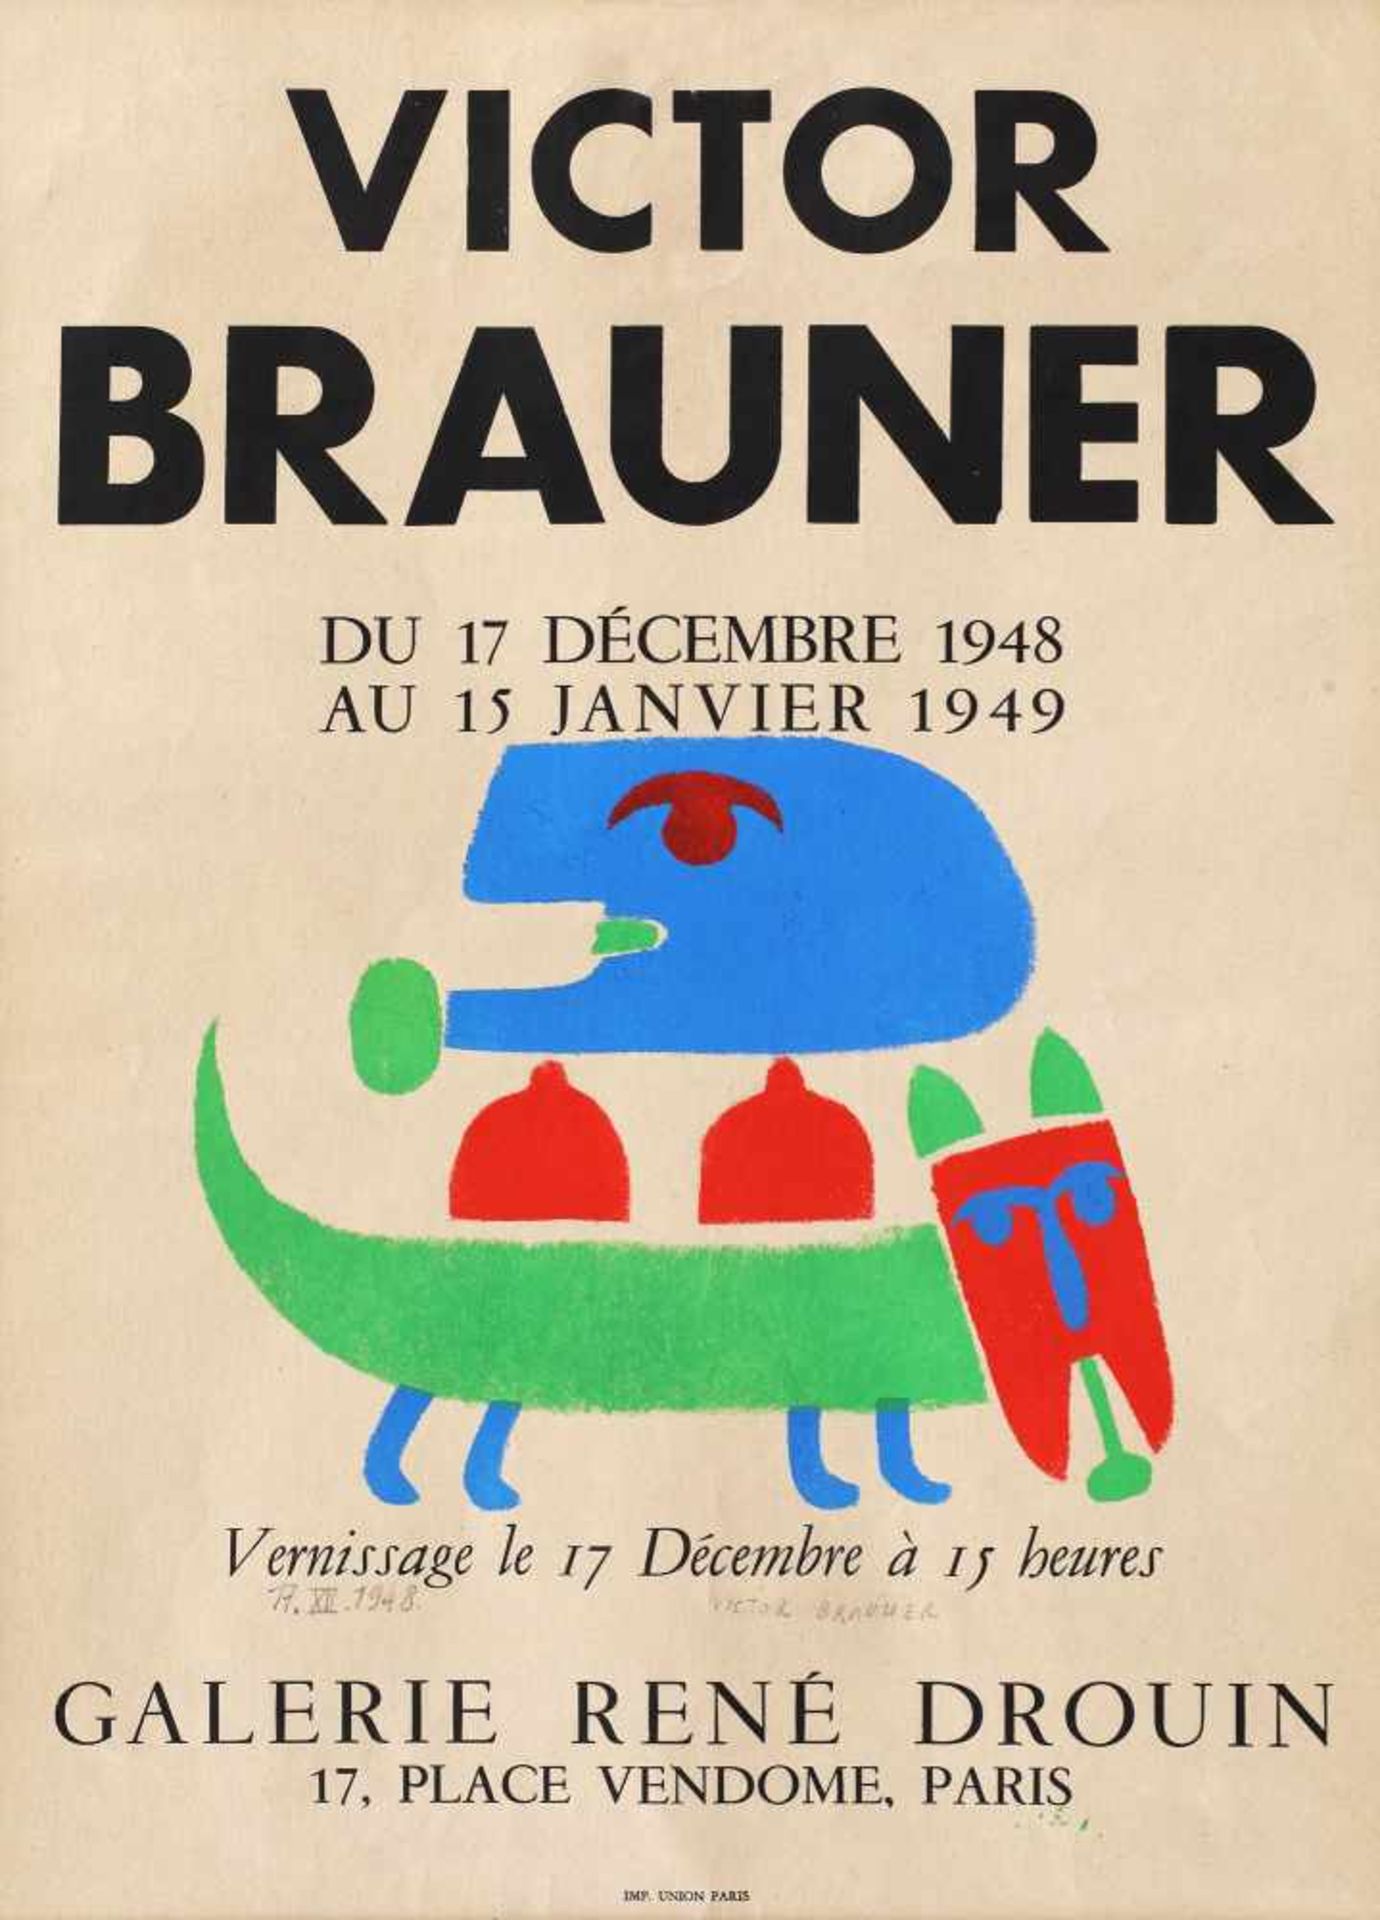 Poster of a Victor Brauner exhibition, at René Drouin Gallery, Paris, December 17, 1948 - January 1